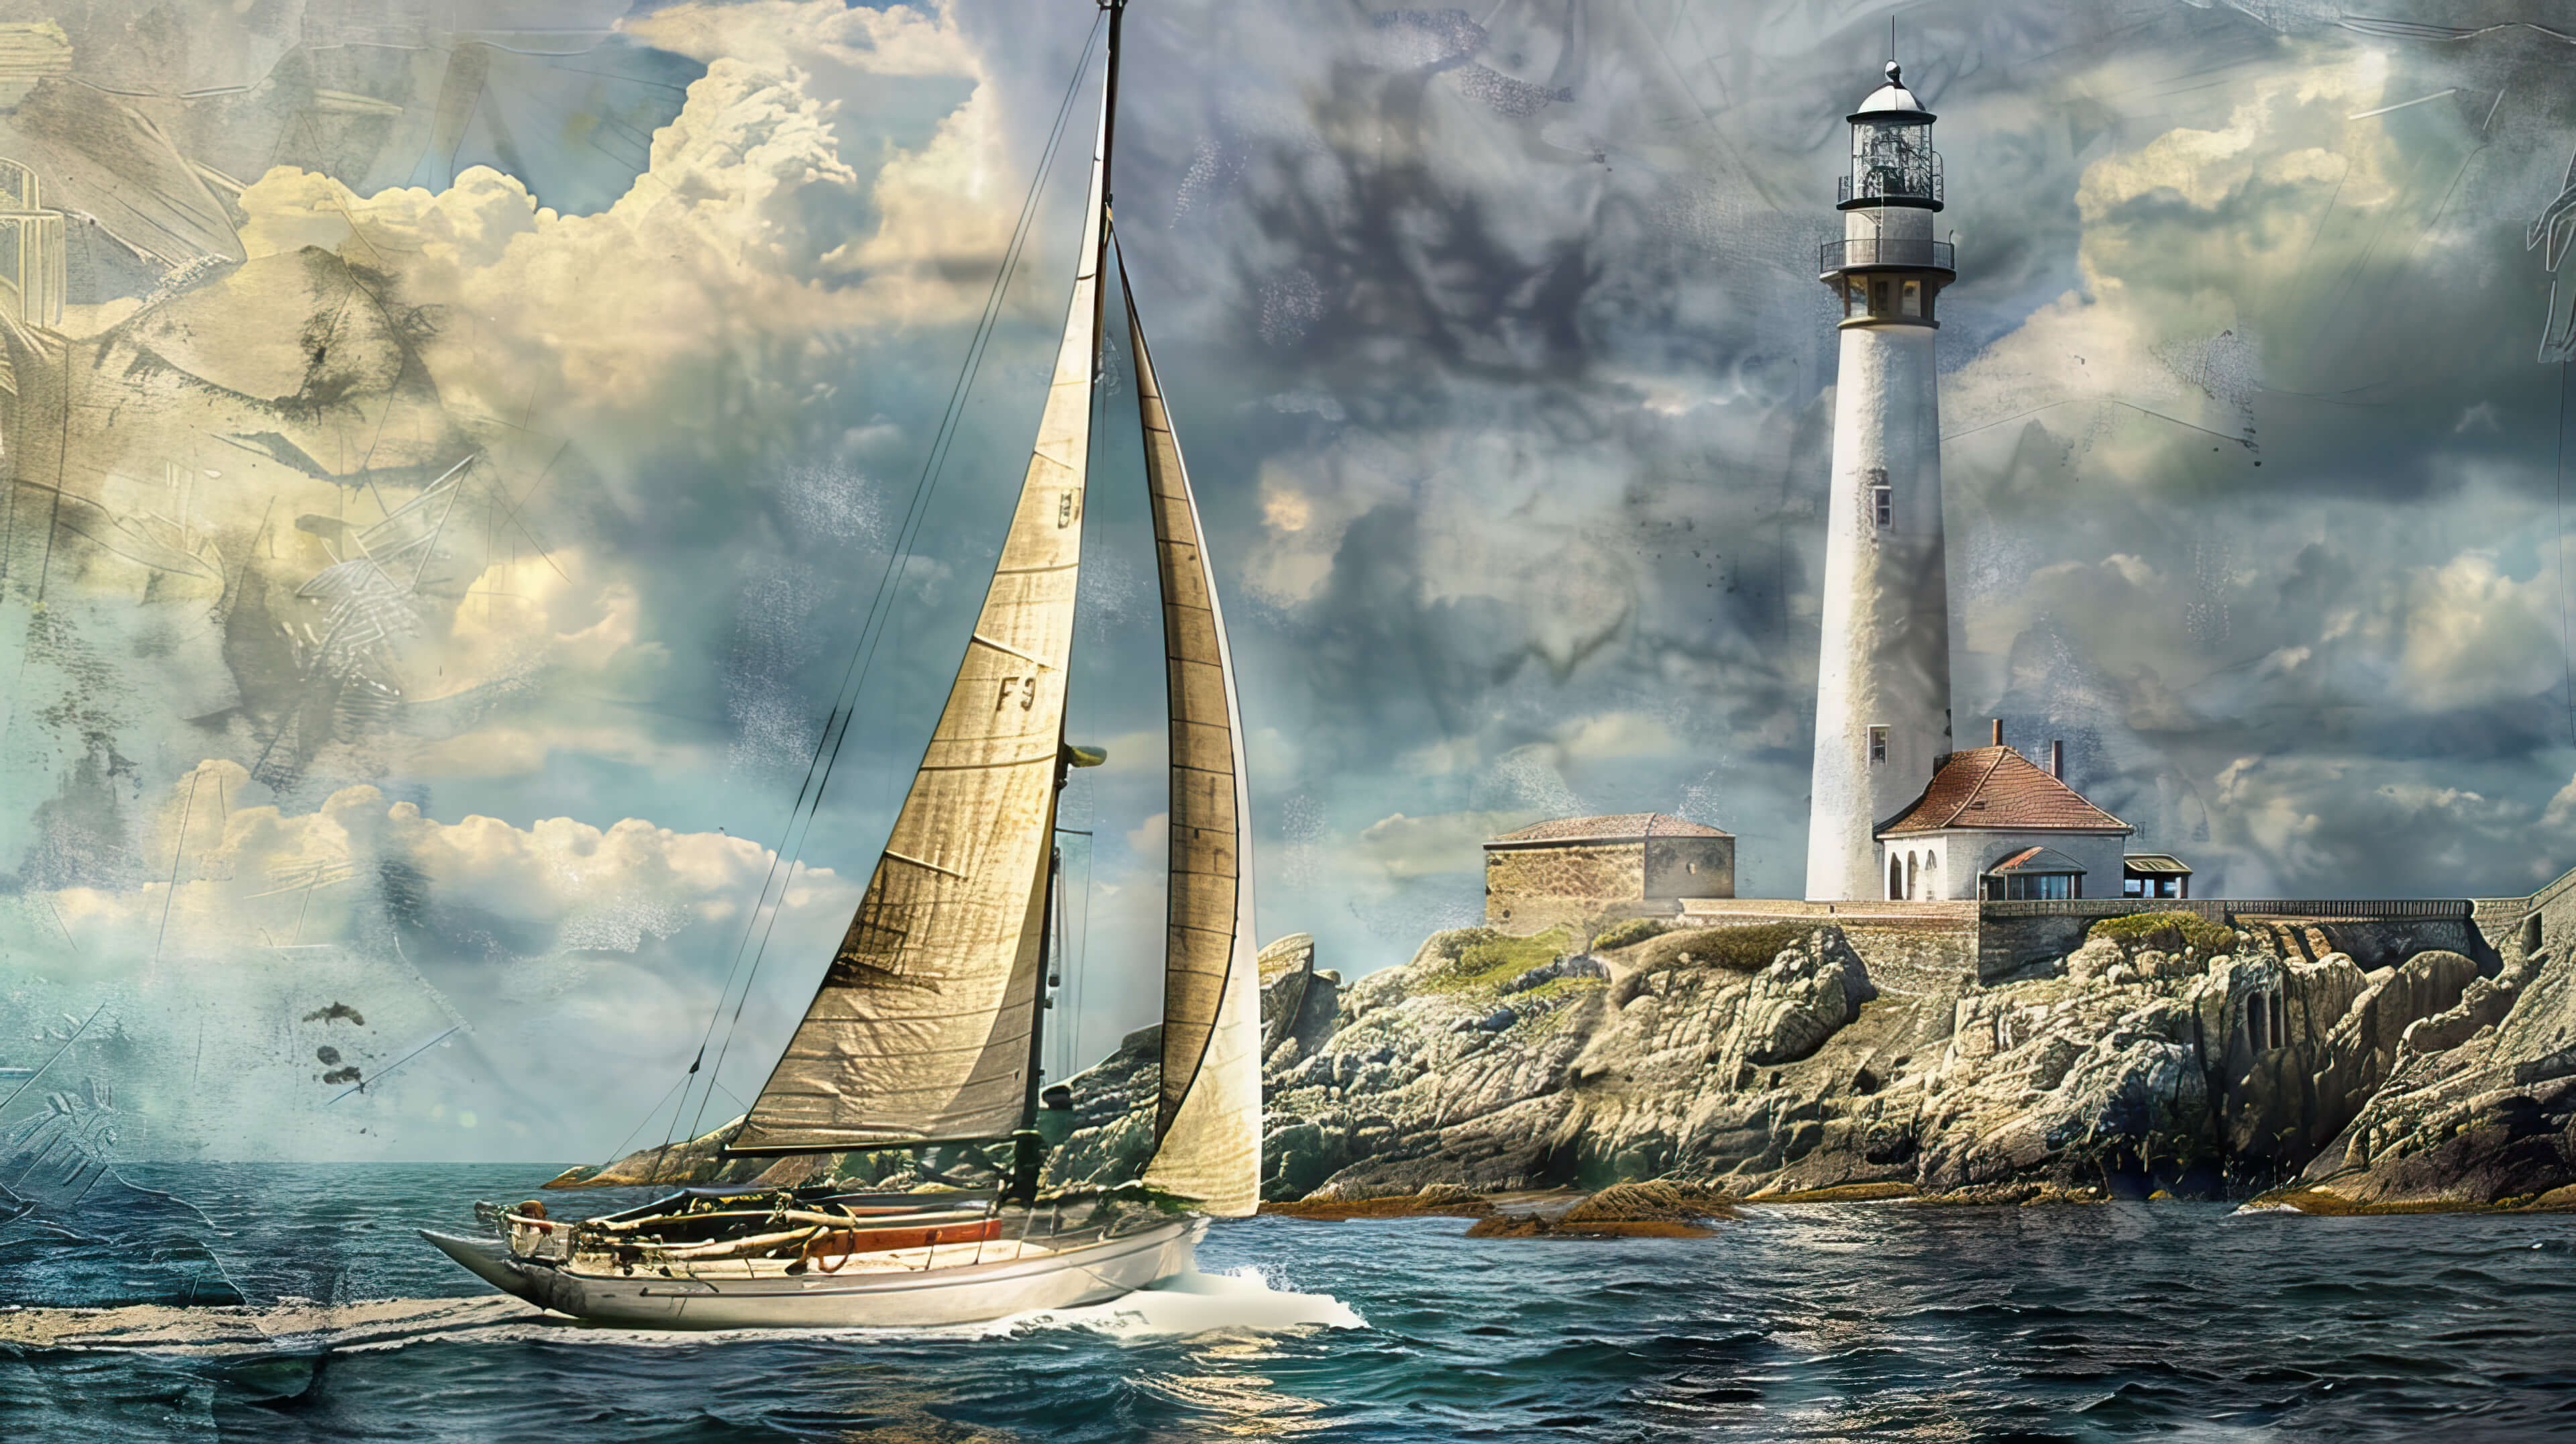 A wallpaper featuring a classic sailboat passing by a lighthouse on a rugged coast invoking feelings of maritime nostalgia and romance